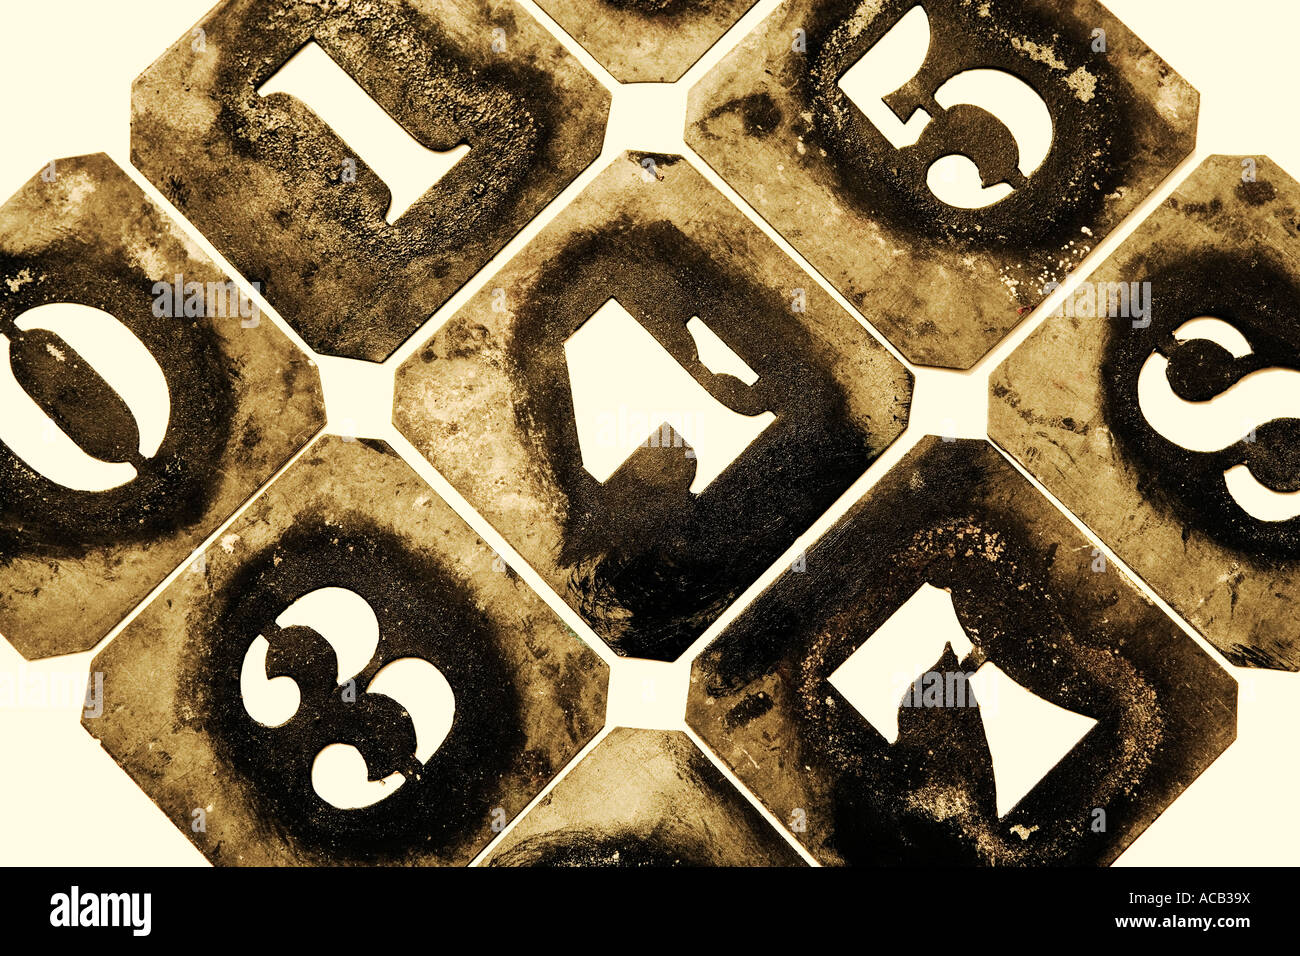 Metal stencil numbers Stock Photo